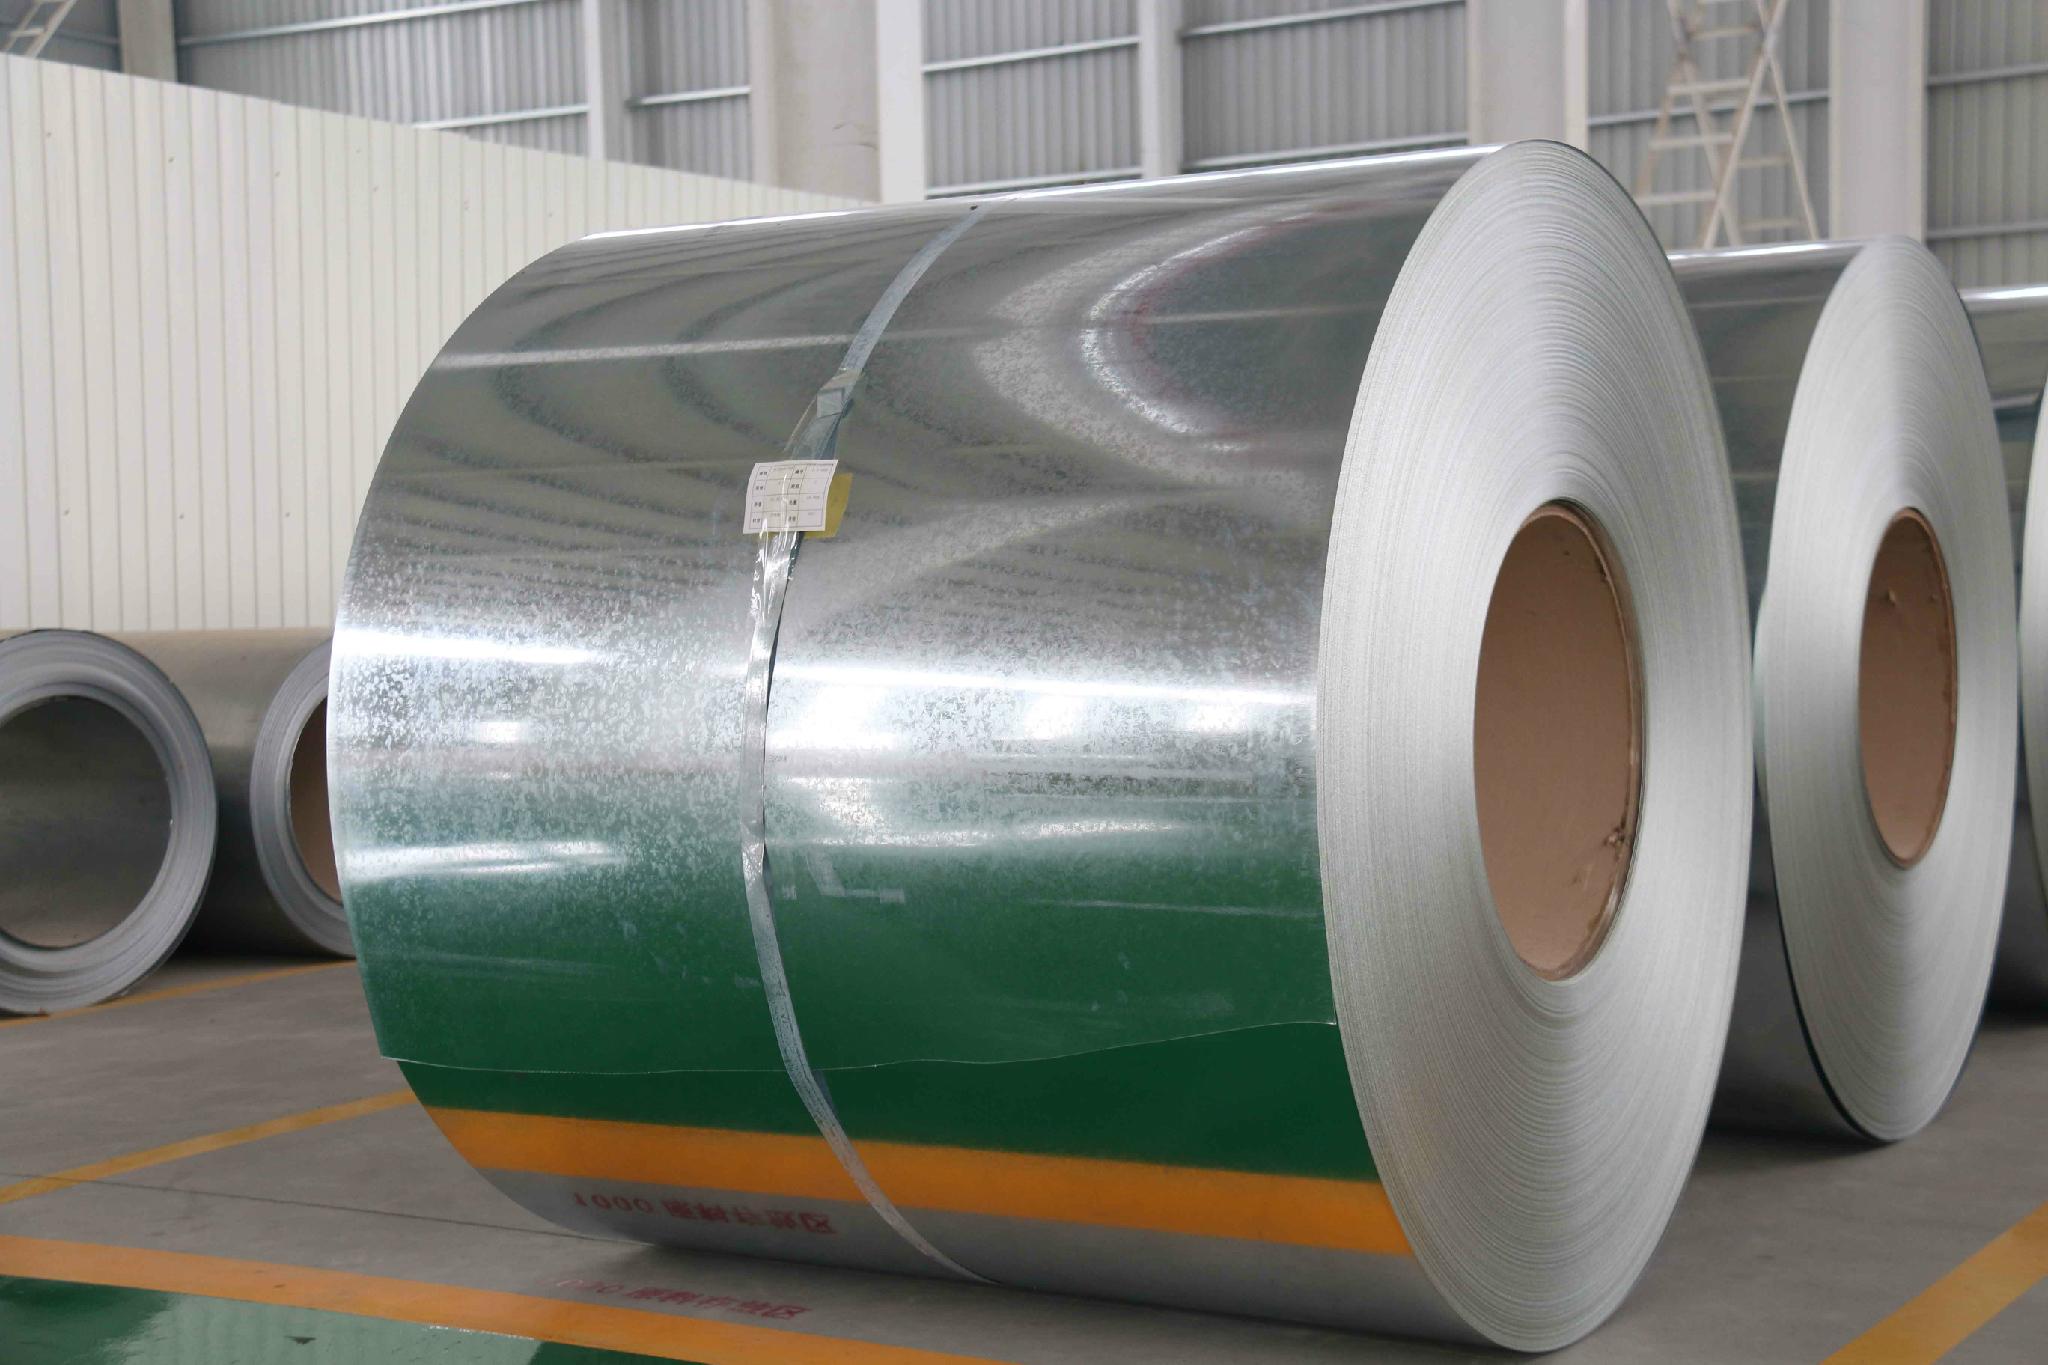 Chinese Good Price Cold Rolled Galvanizing Steel Coil